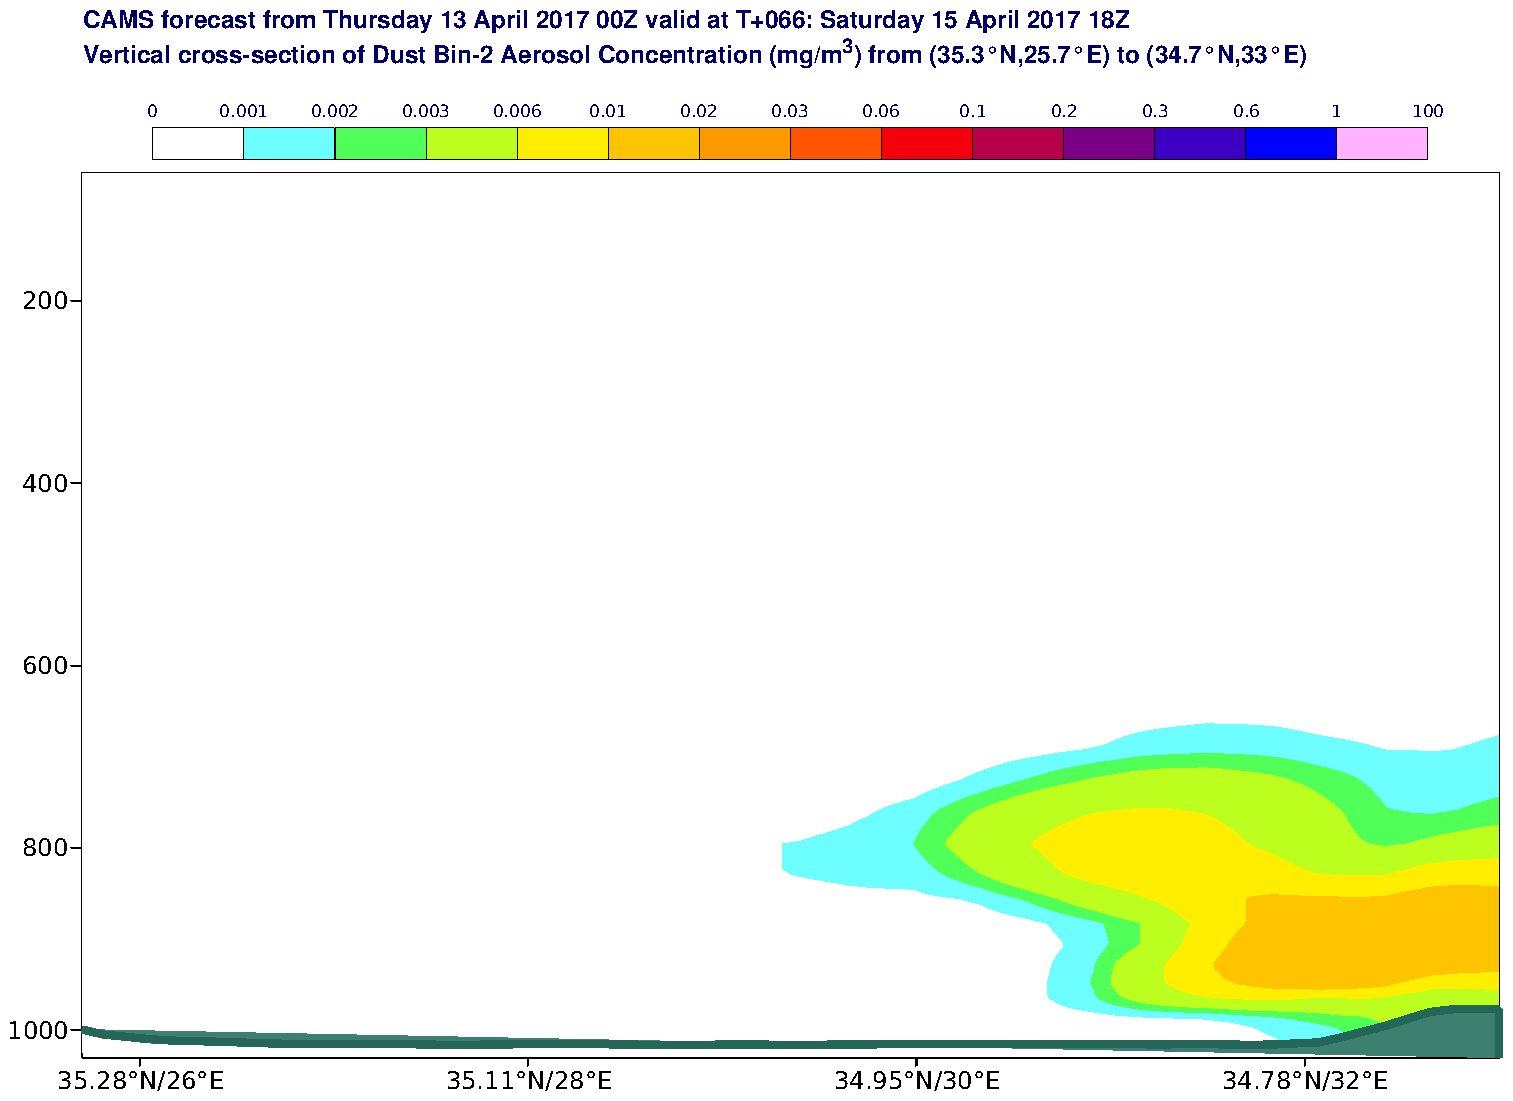 Vertical cross-section of Dust Bin-2 Aerosol Concentration (mg/m3) valid at T66 - 2017-04-15 18:00